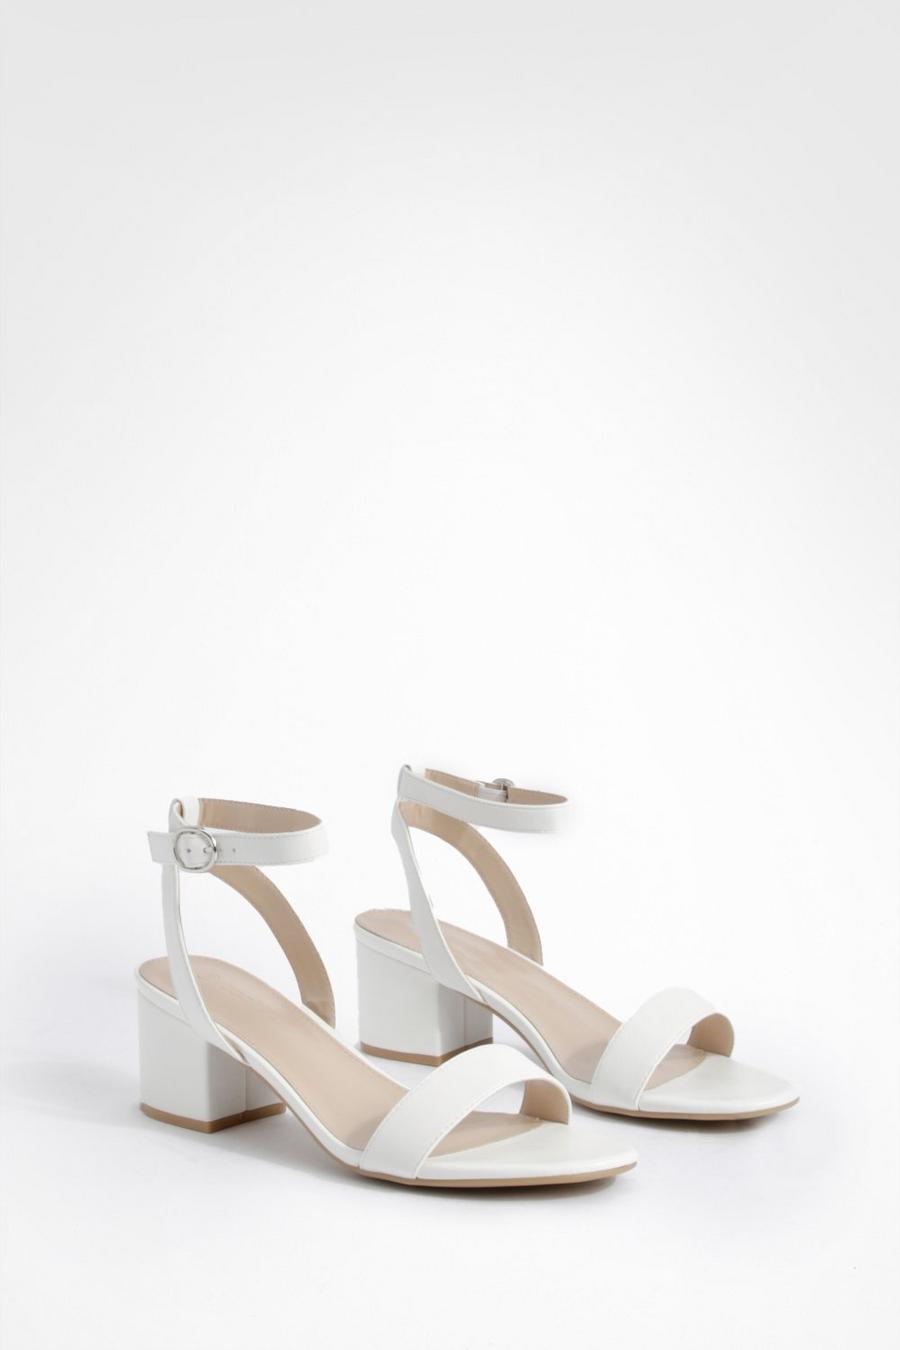 White Low Block Barely There Heels  